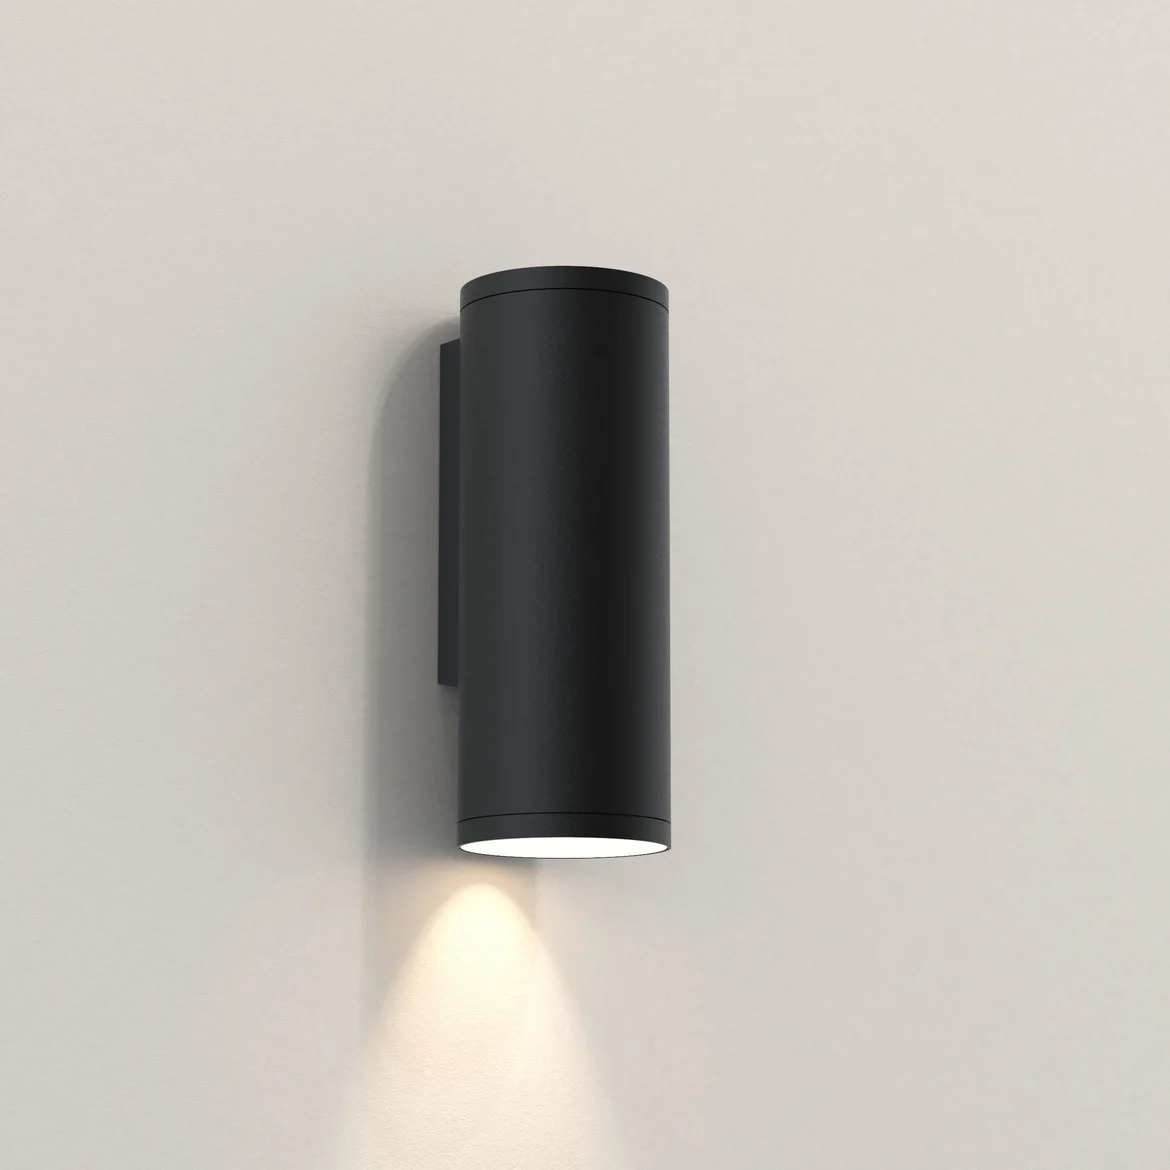 The Ava wall light is a modern style downlight with a simple cylindrical design and sleek textured black finish. IP44 rated and suitable for outdoor use.